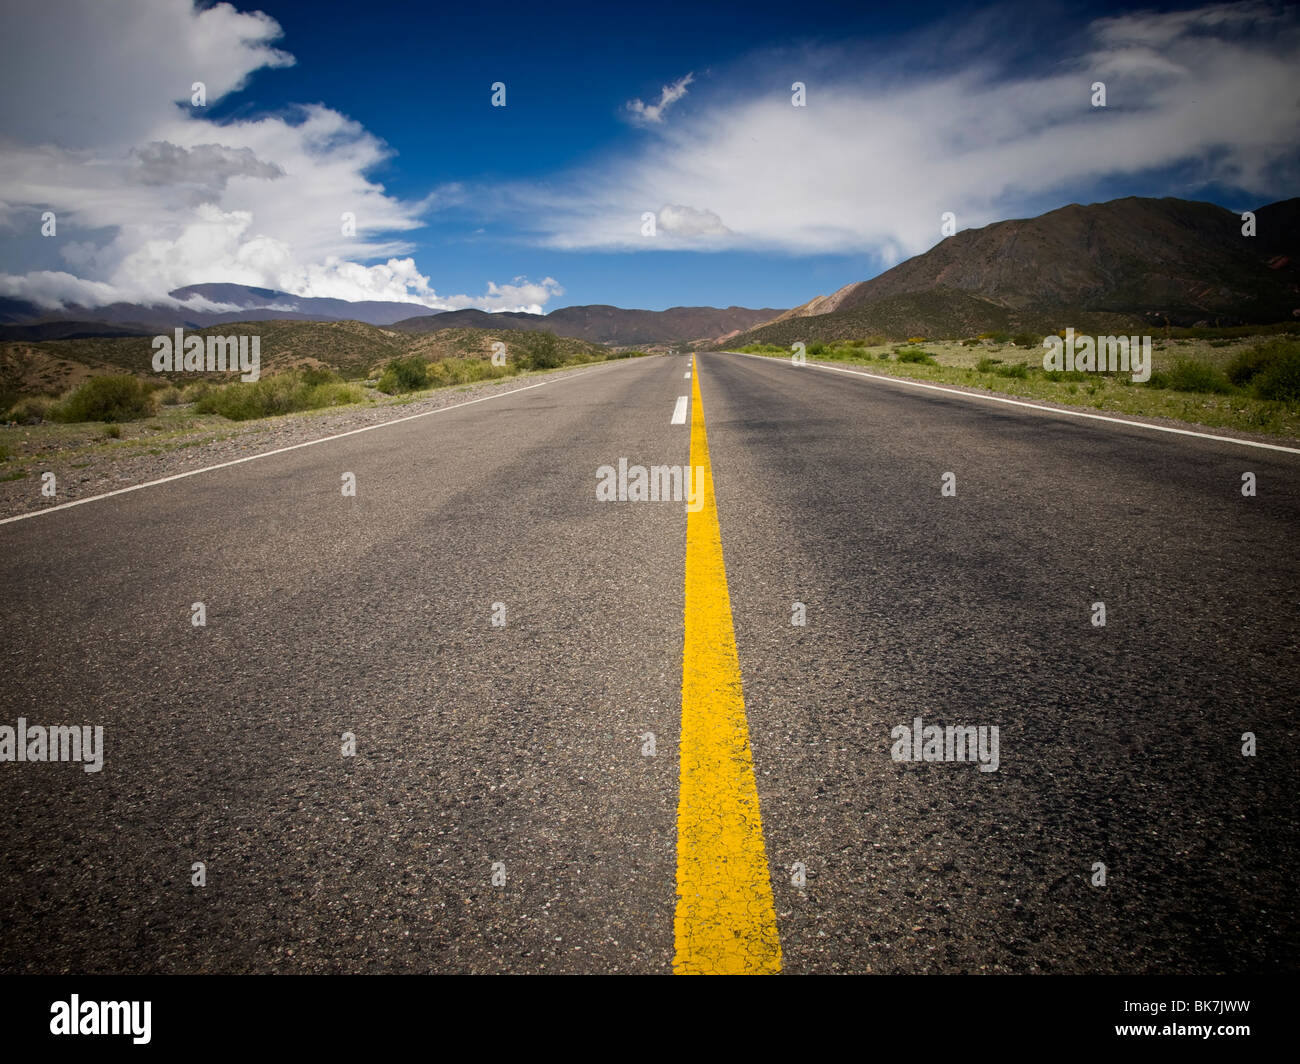 A desert road by the mountains surrounded by colorful nature. Stock Photo